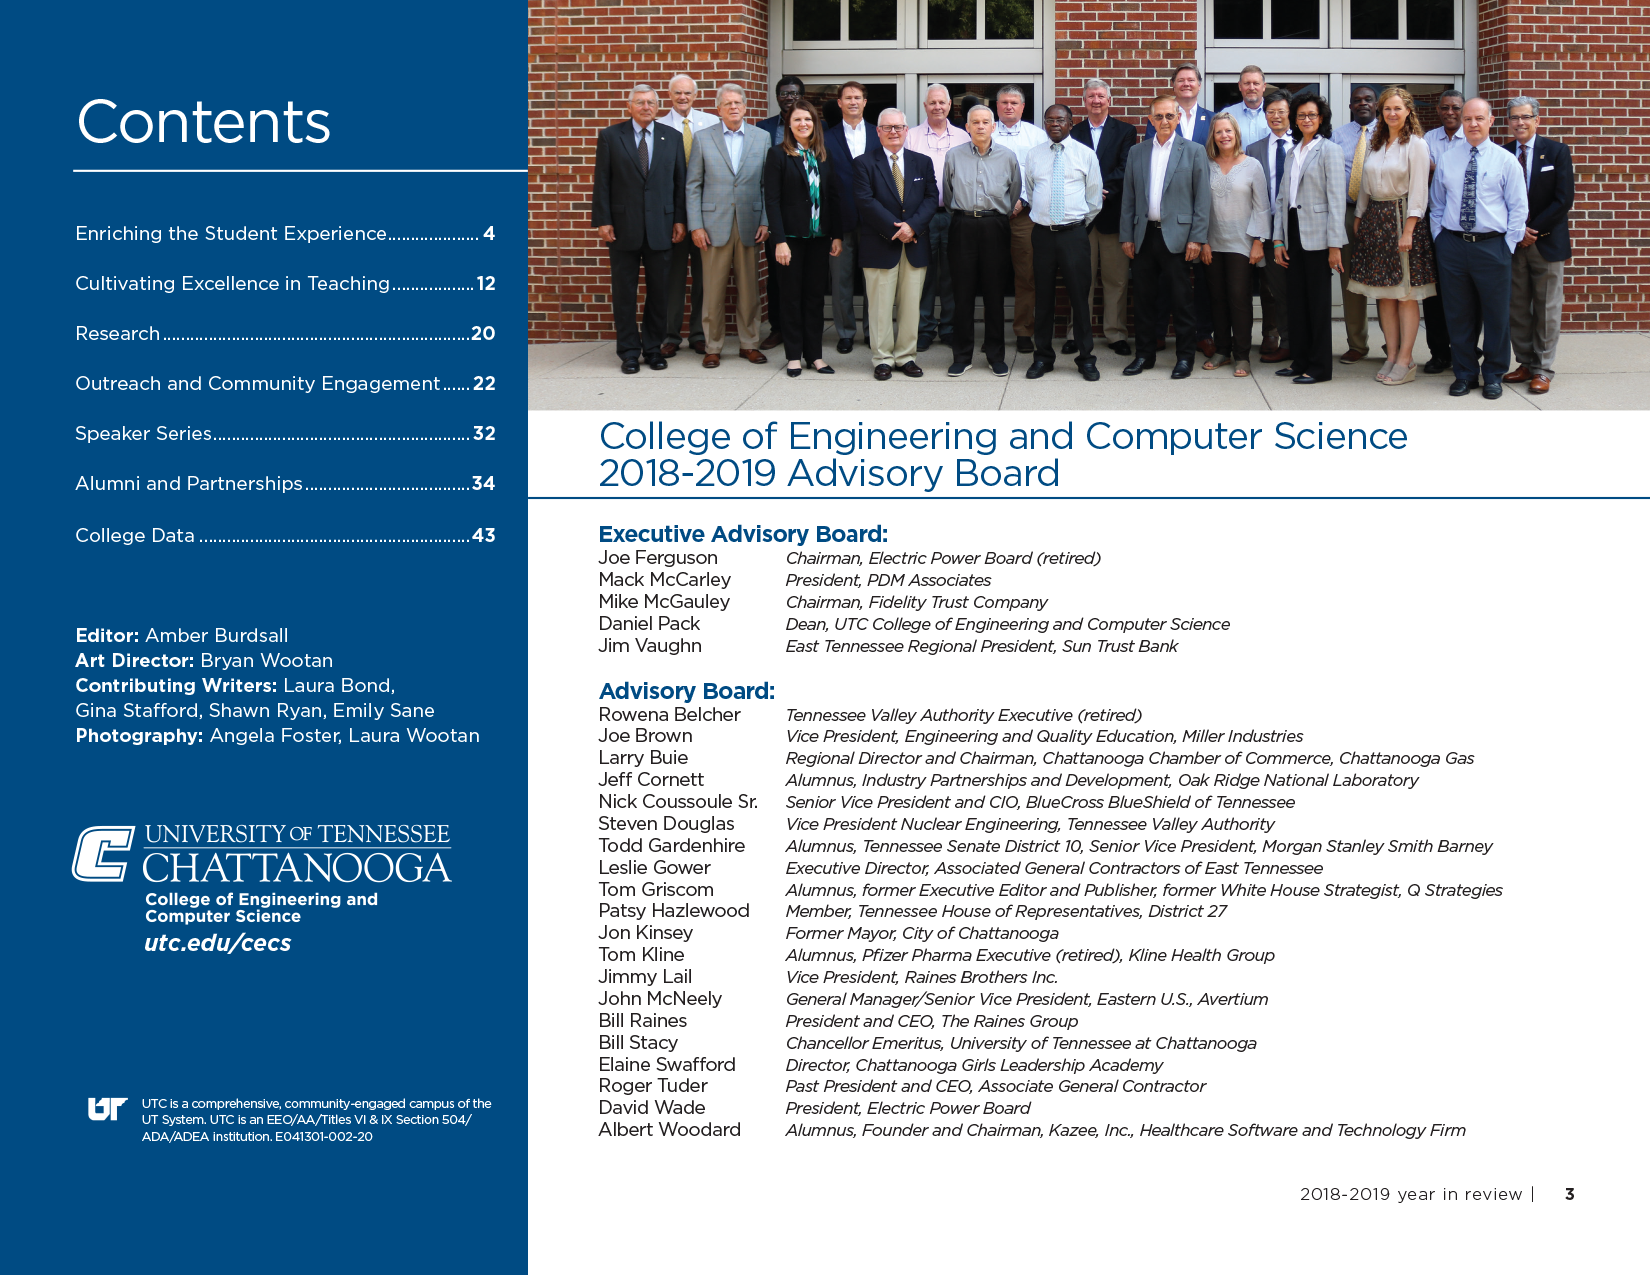 College of Engineering and Computer Science Annual Review; text equivalent available at utc.edu/college-engineering-computer-science/annual-review